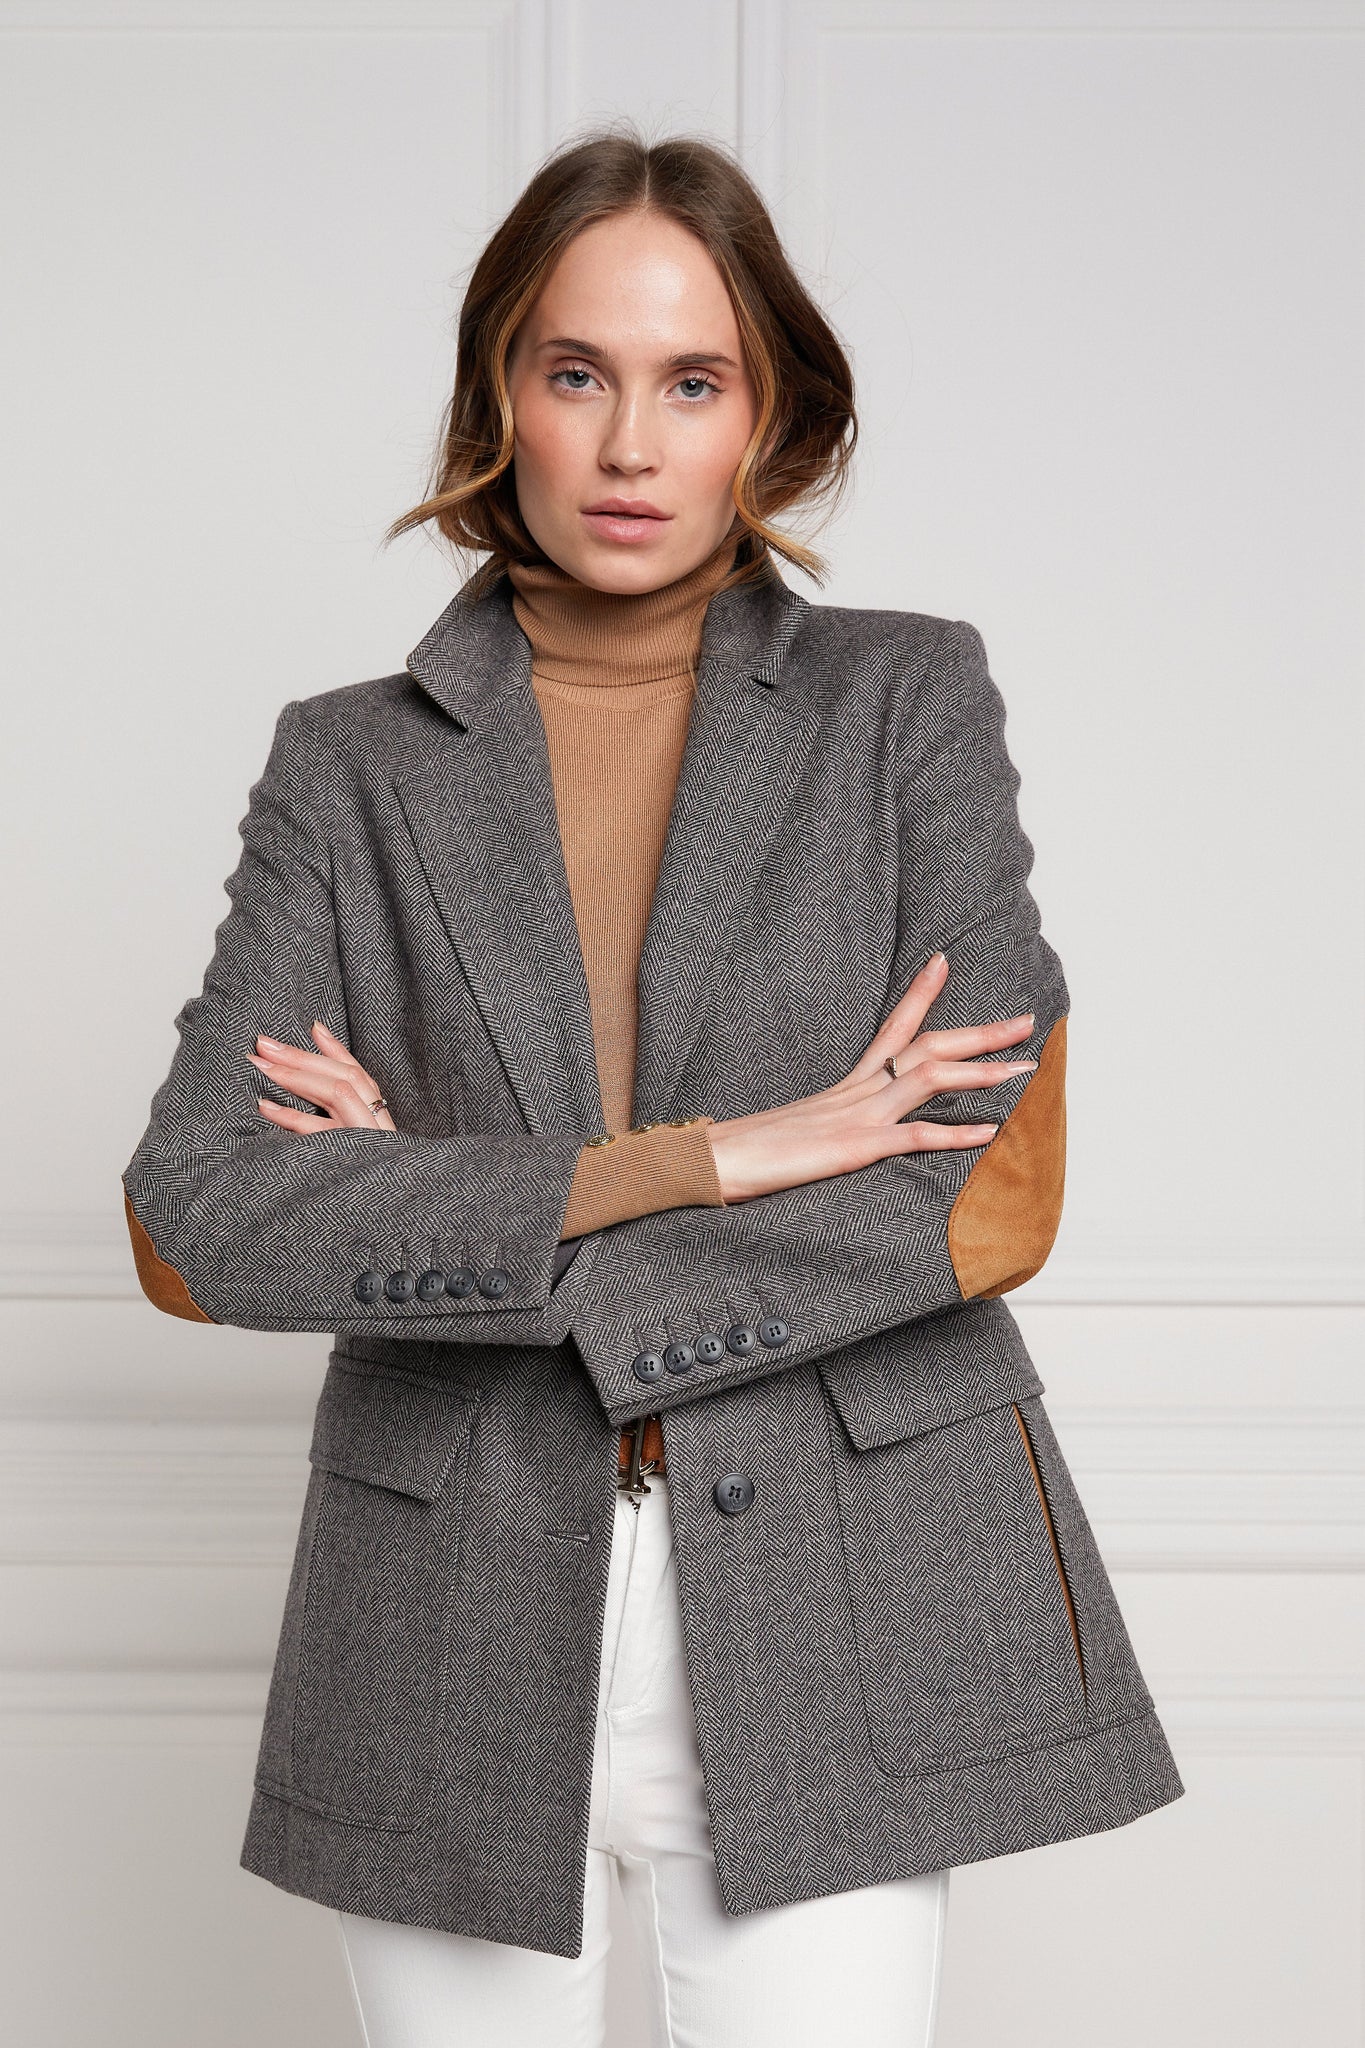 womens tailored fit single breasted blazer in grey herringbone with patch pockets and contrast tan suede elbow patches and underside collar